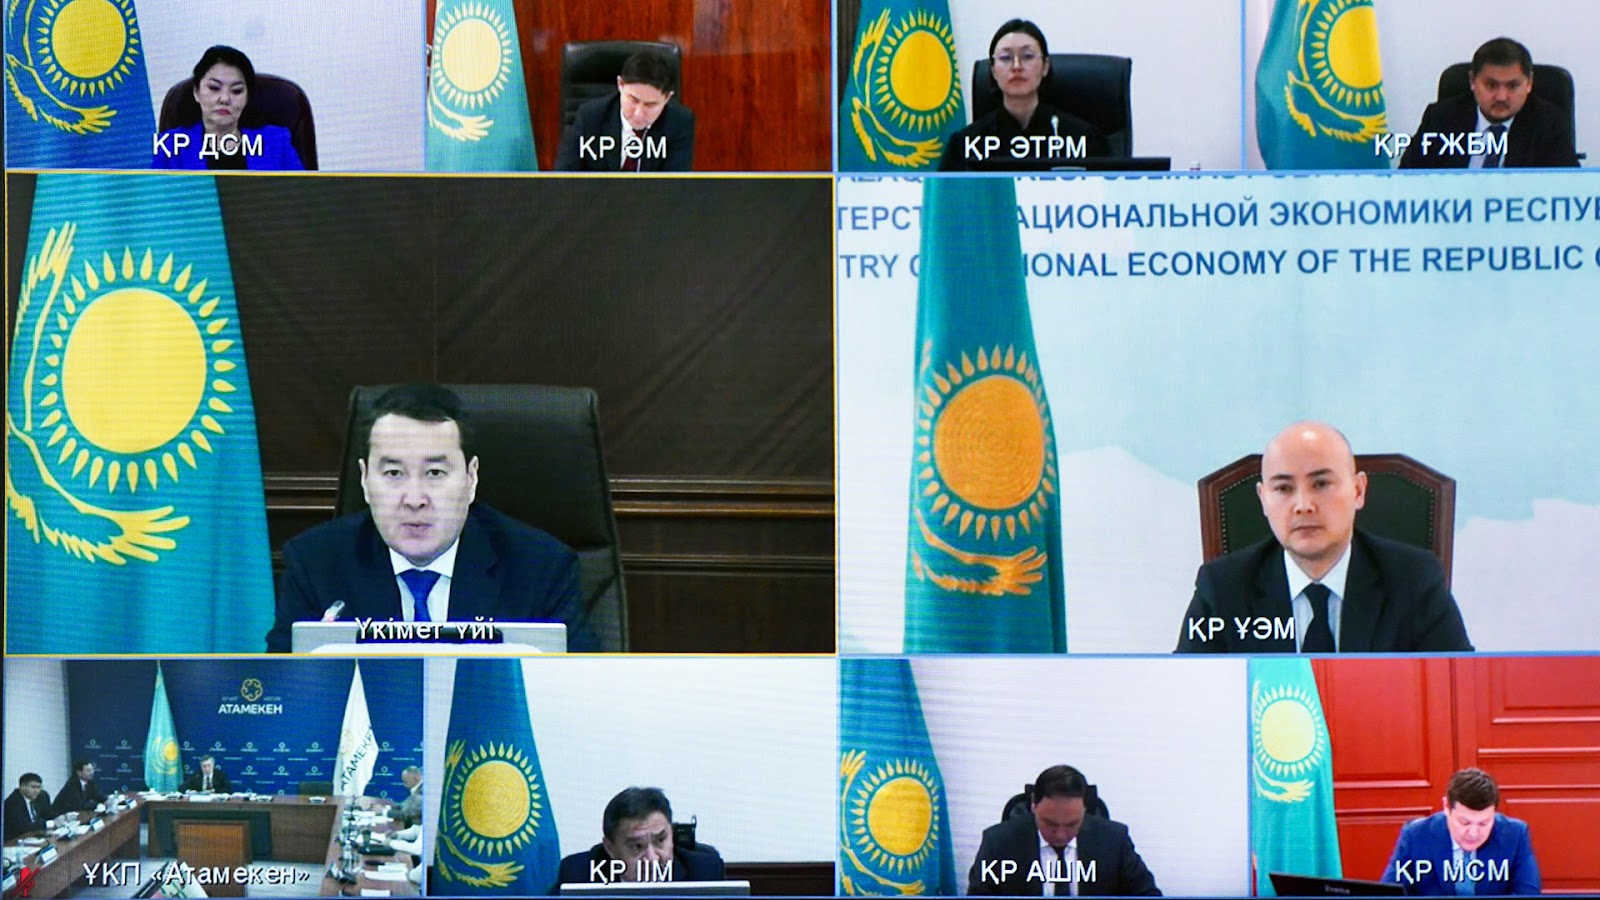 Kazakhstan seeks to increase the capacity of the mining and metallurgical industry